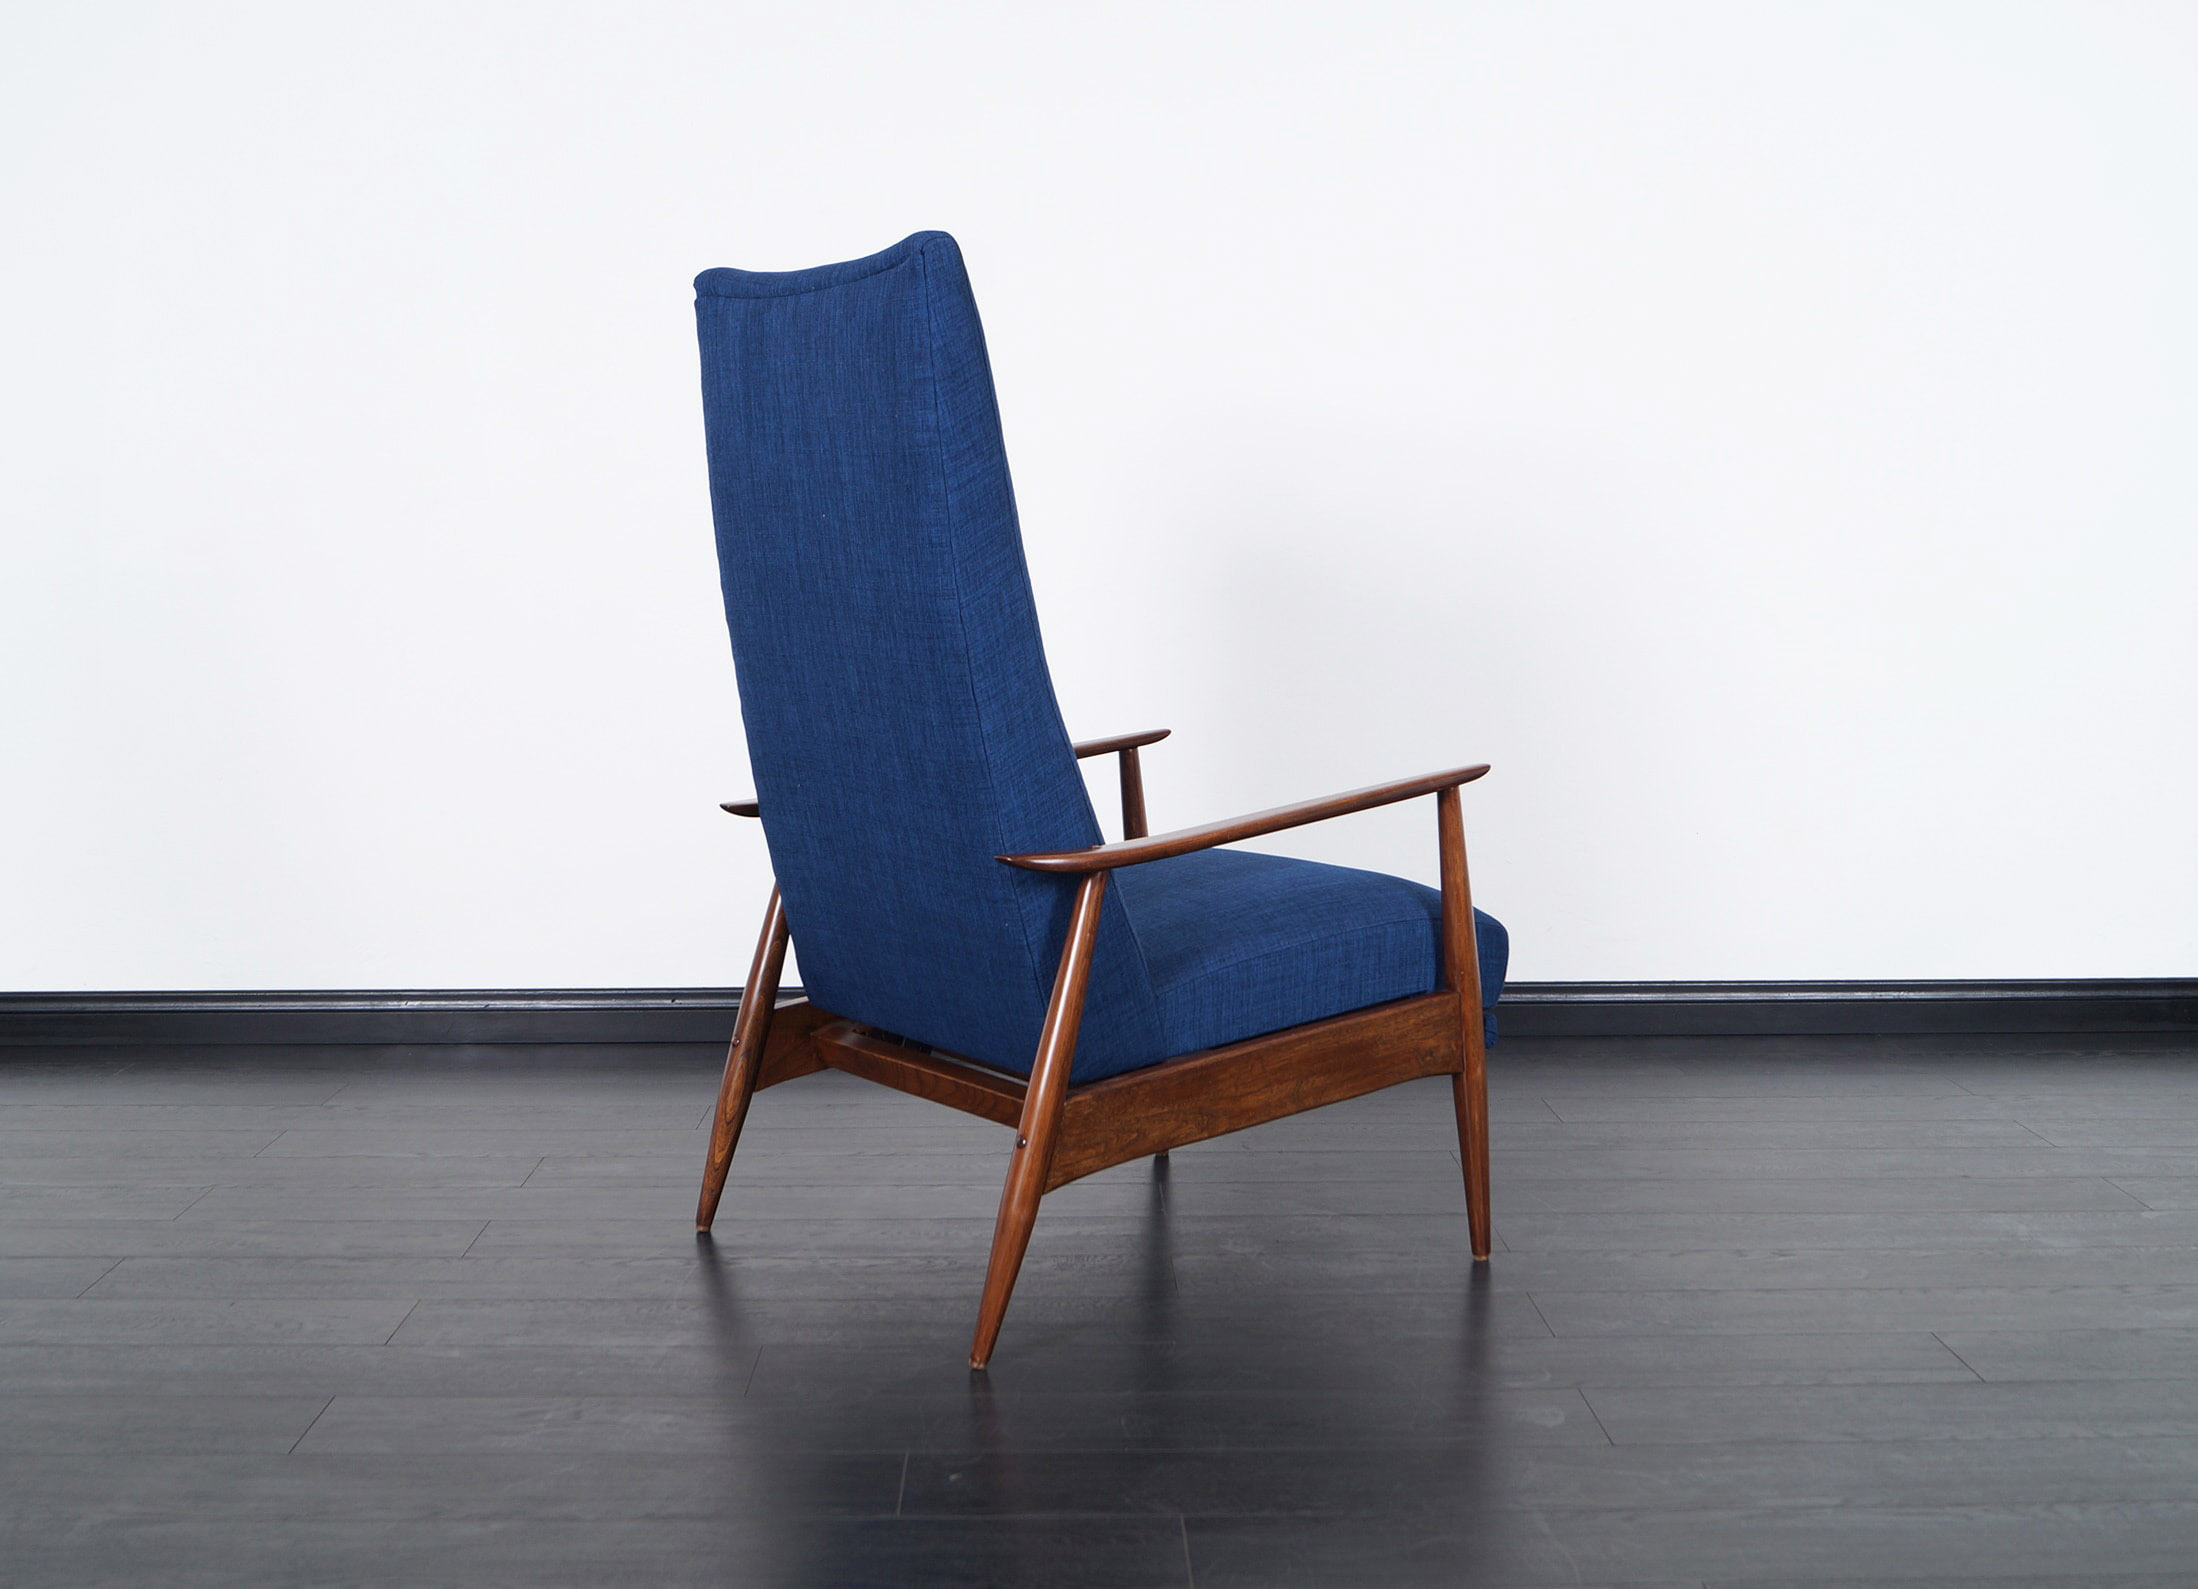 Vintage Reclining Lounge Chair by Milo Baughman